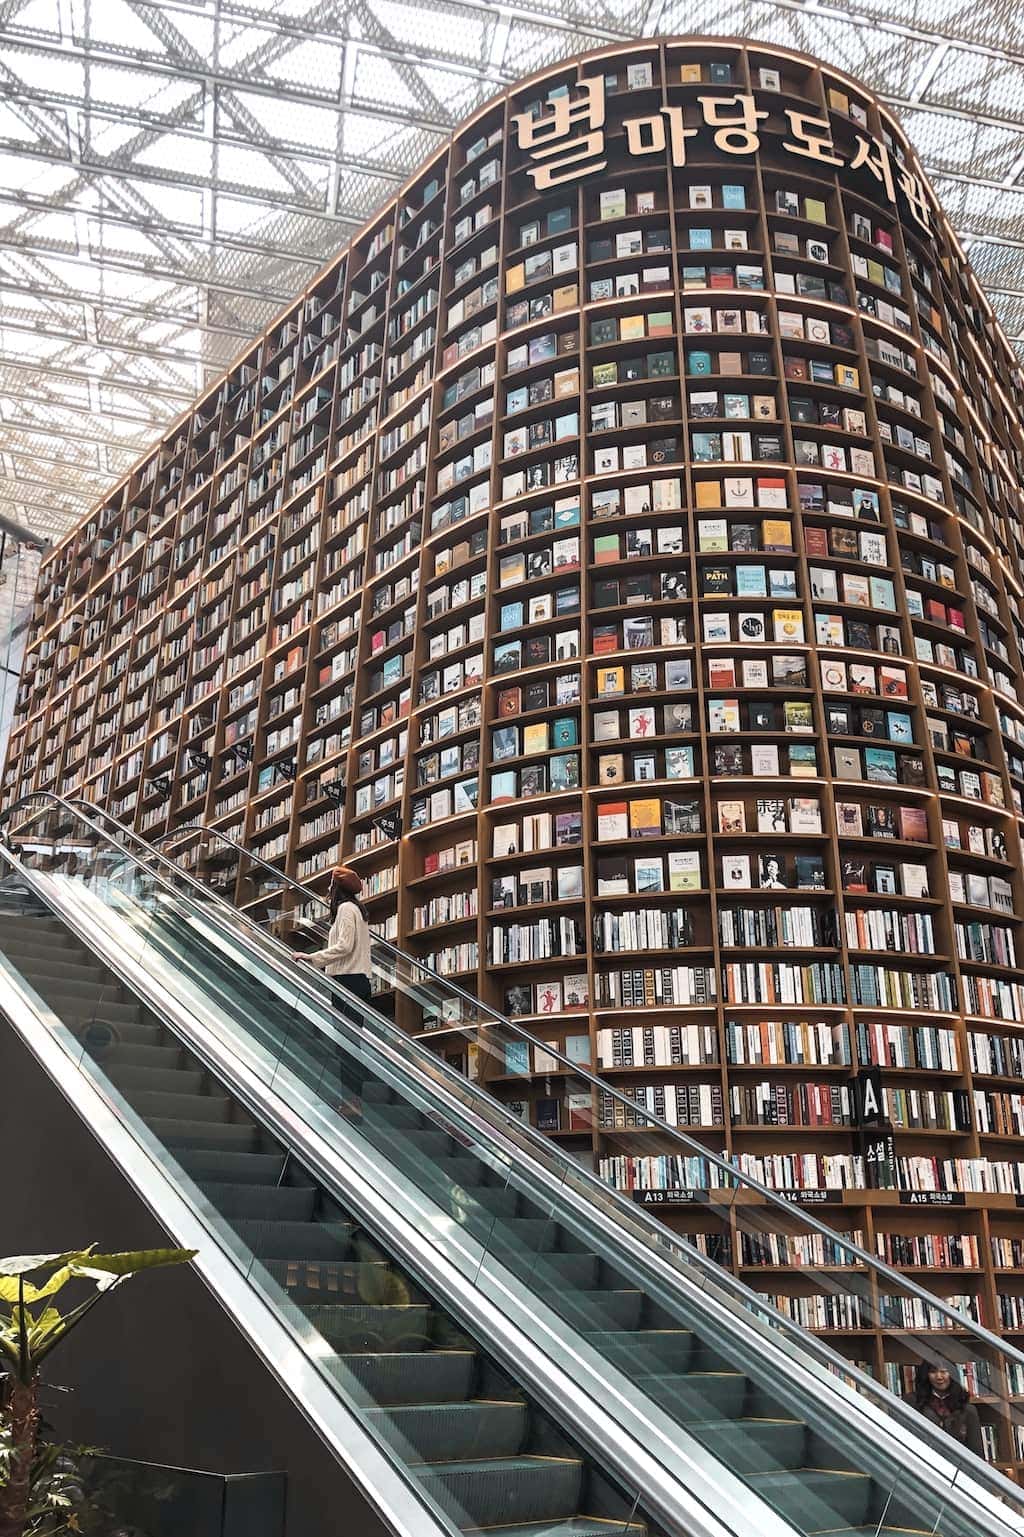 Instagrammable places Seoul: Starfield Library